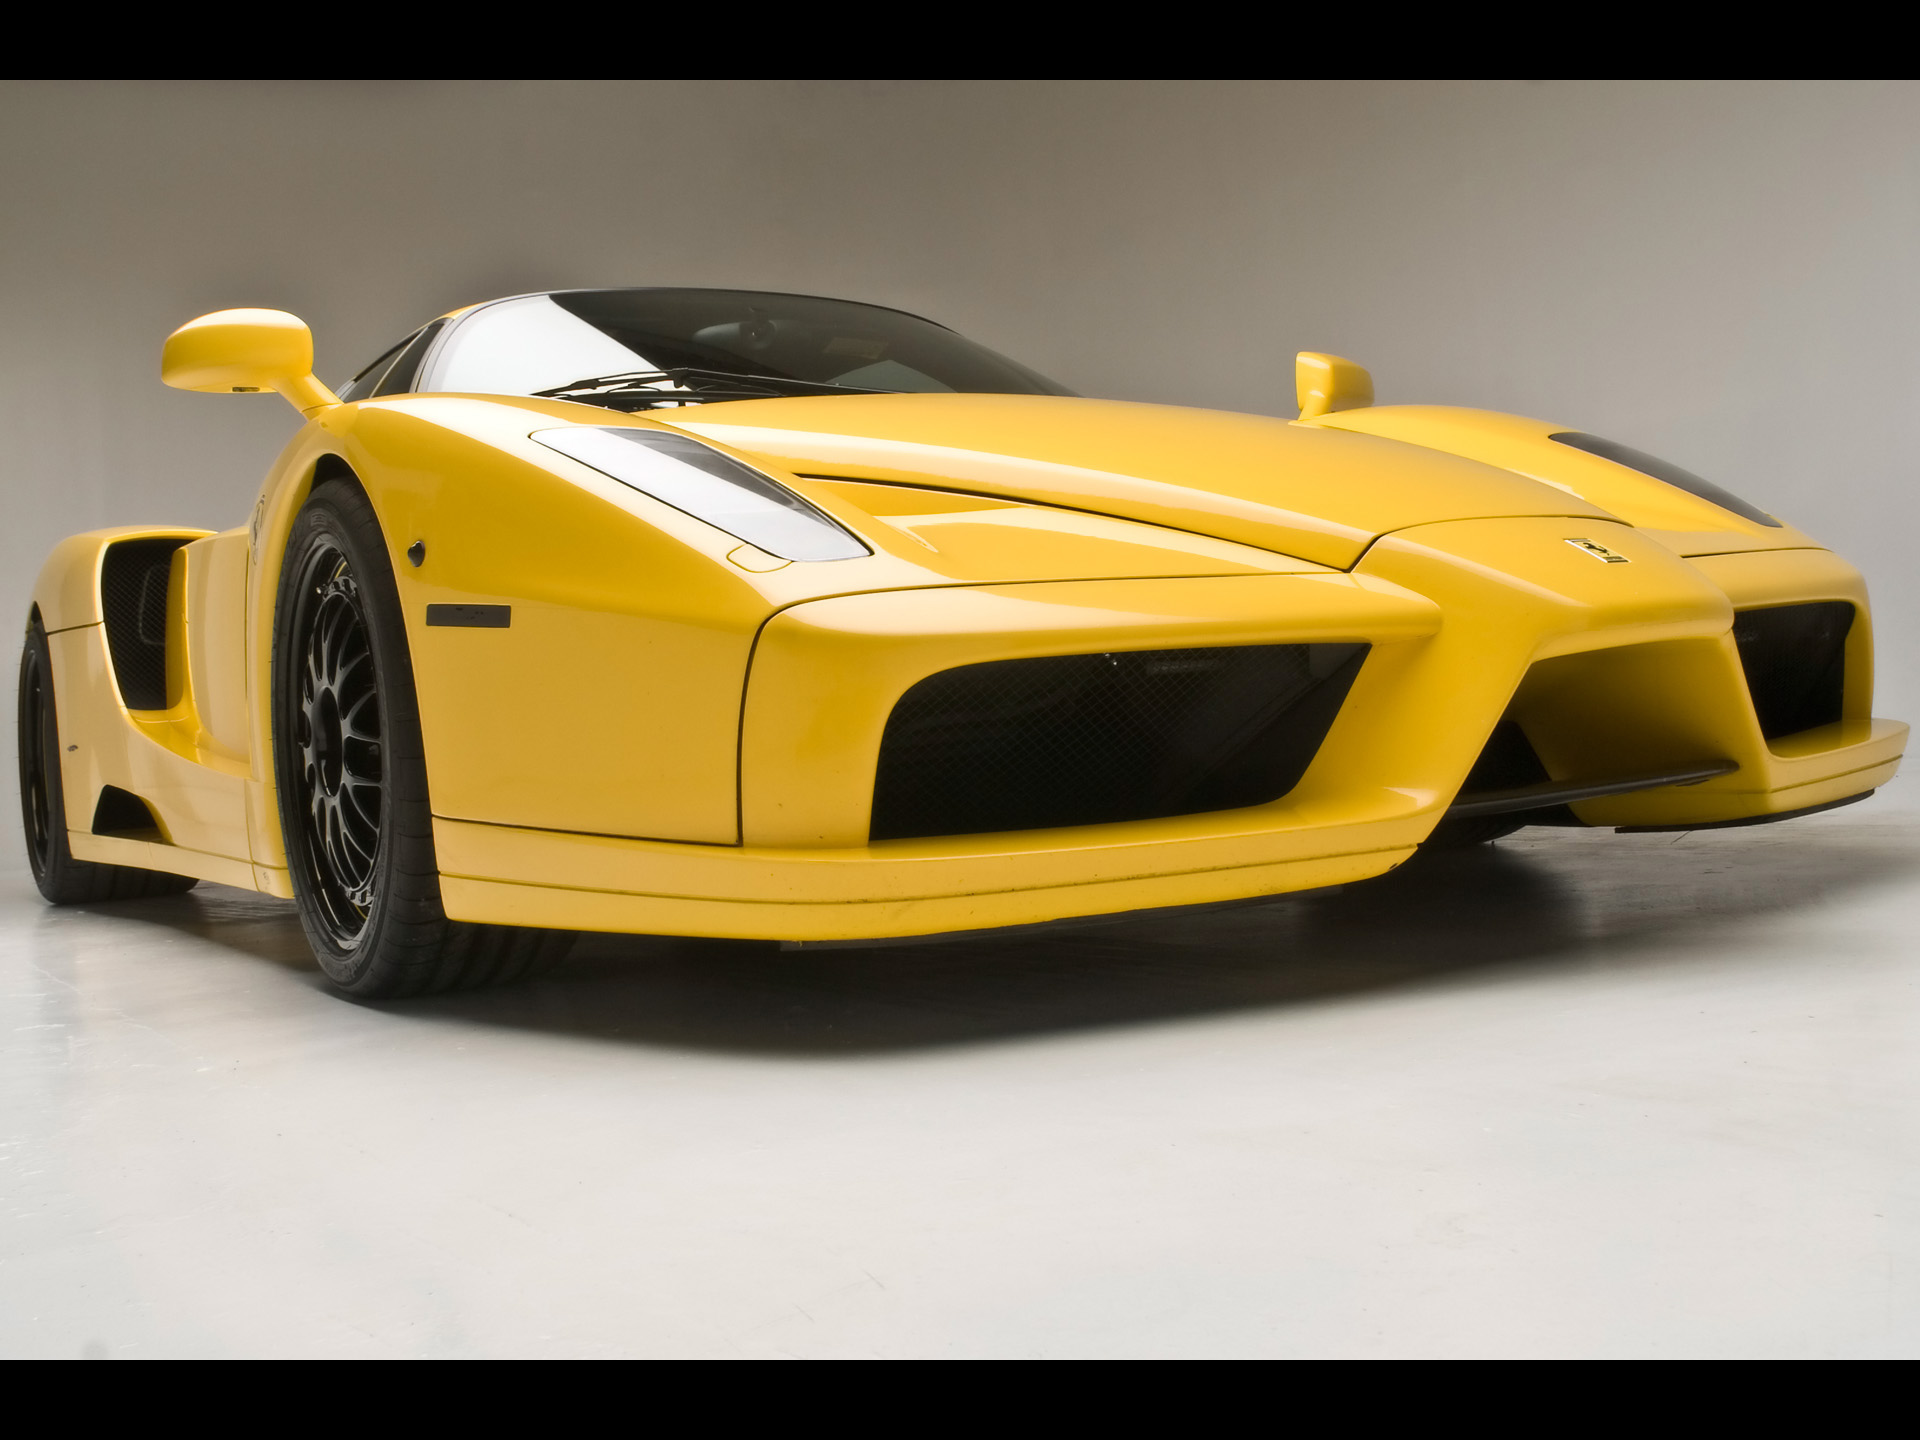 Download full size 2008 Edo Competitioni Enzo Front Angle Low View Ferrari wallpaper / 1920x1440